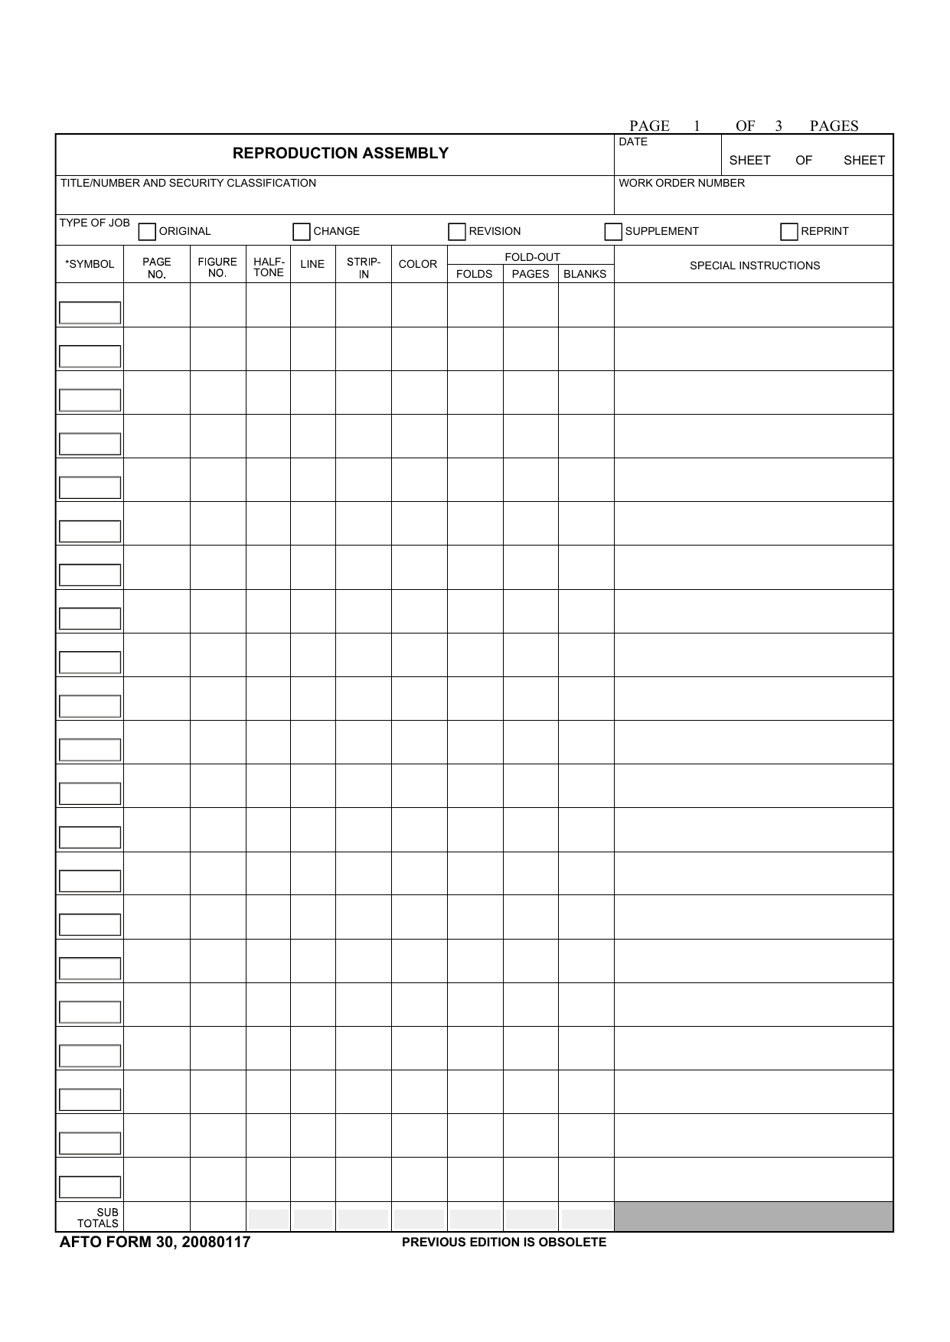 AFTO Form 30 Reproduction Assembly Sheet, Page 1